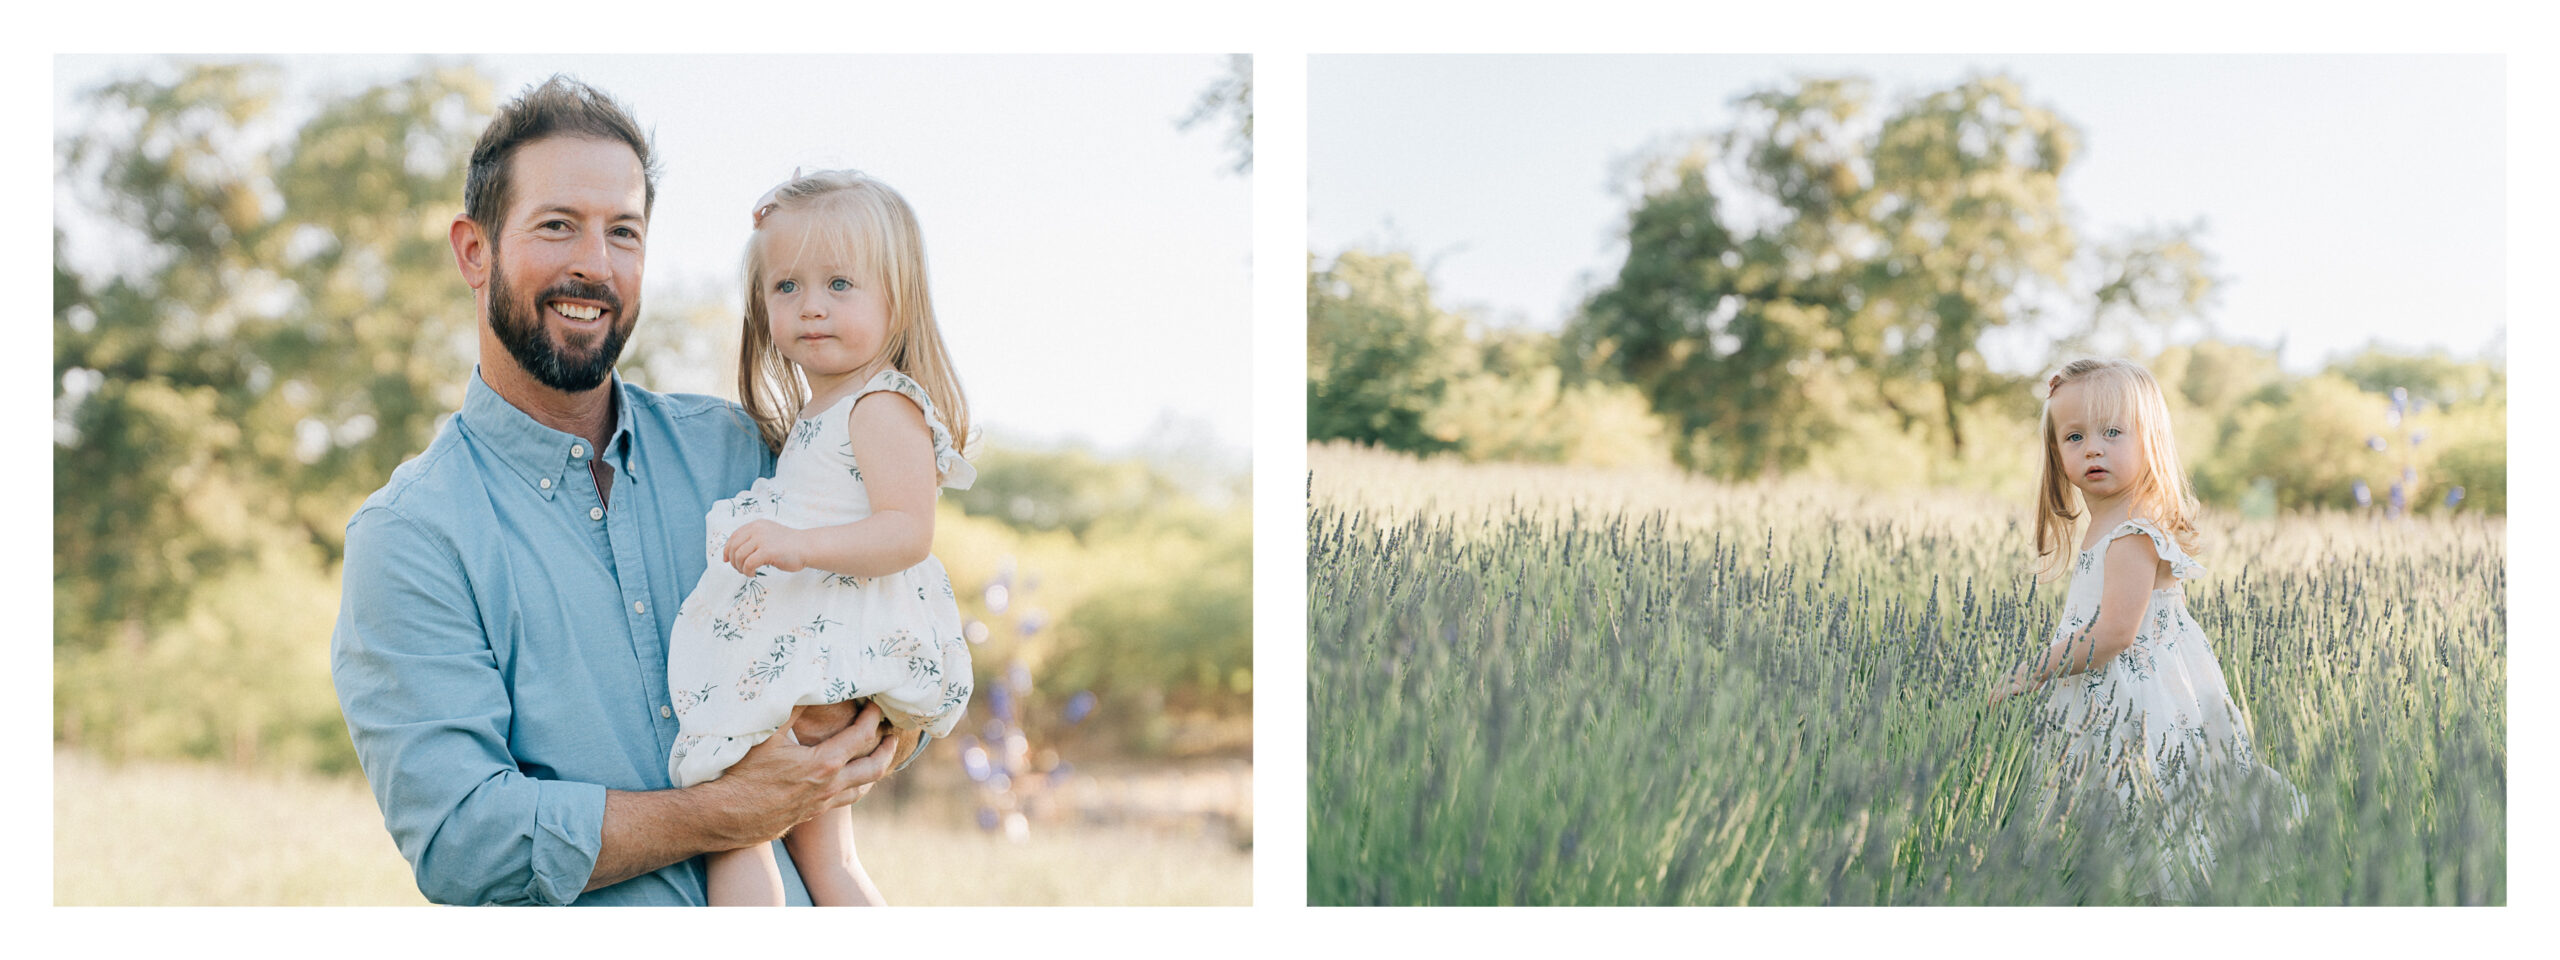 family pictures in lavender fields of dad and daughter.